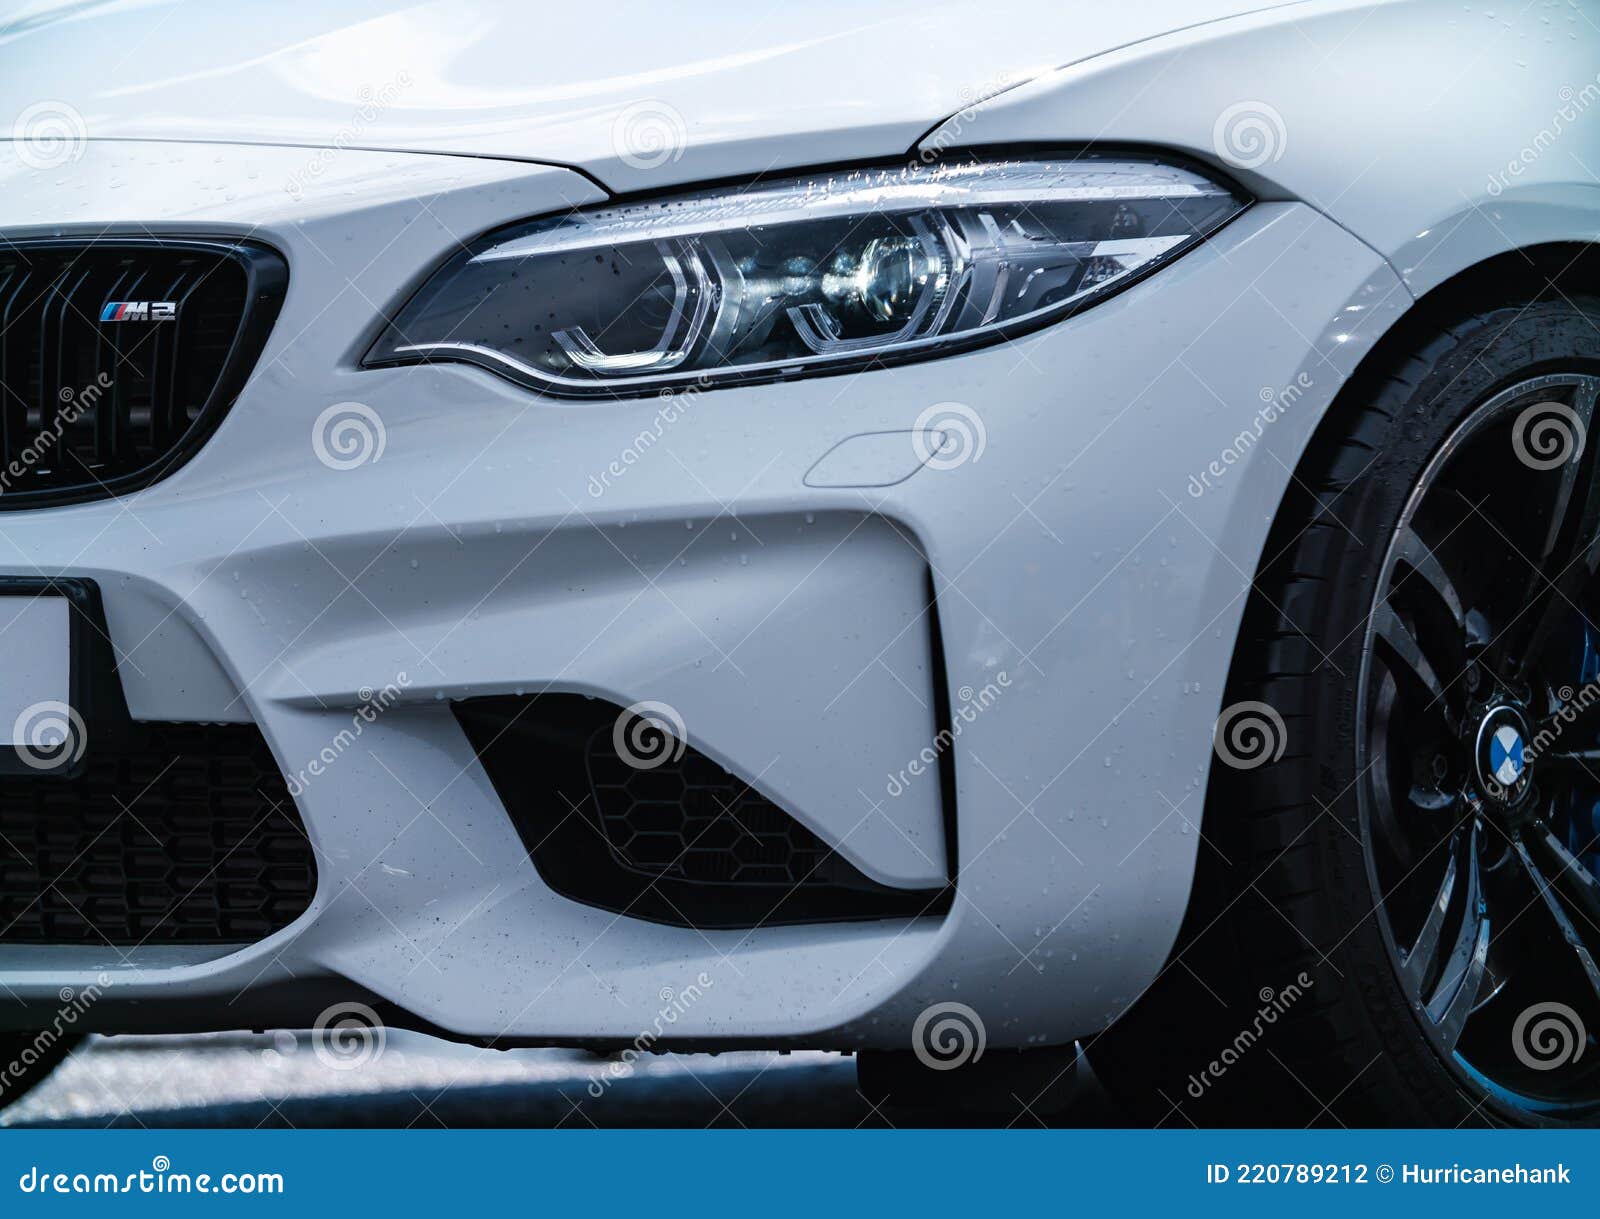 Bmw M2 F87 Sports Car In Snow White Color Equipped With Ac Schnitzer Wheels  With Low Profile Tires On Drift And Editorial Photography - Image Of  Luxury, Automobile: 220789212